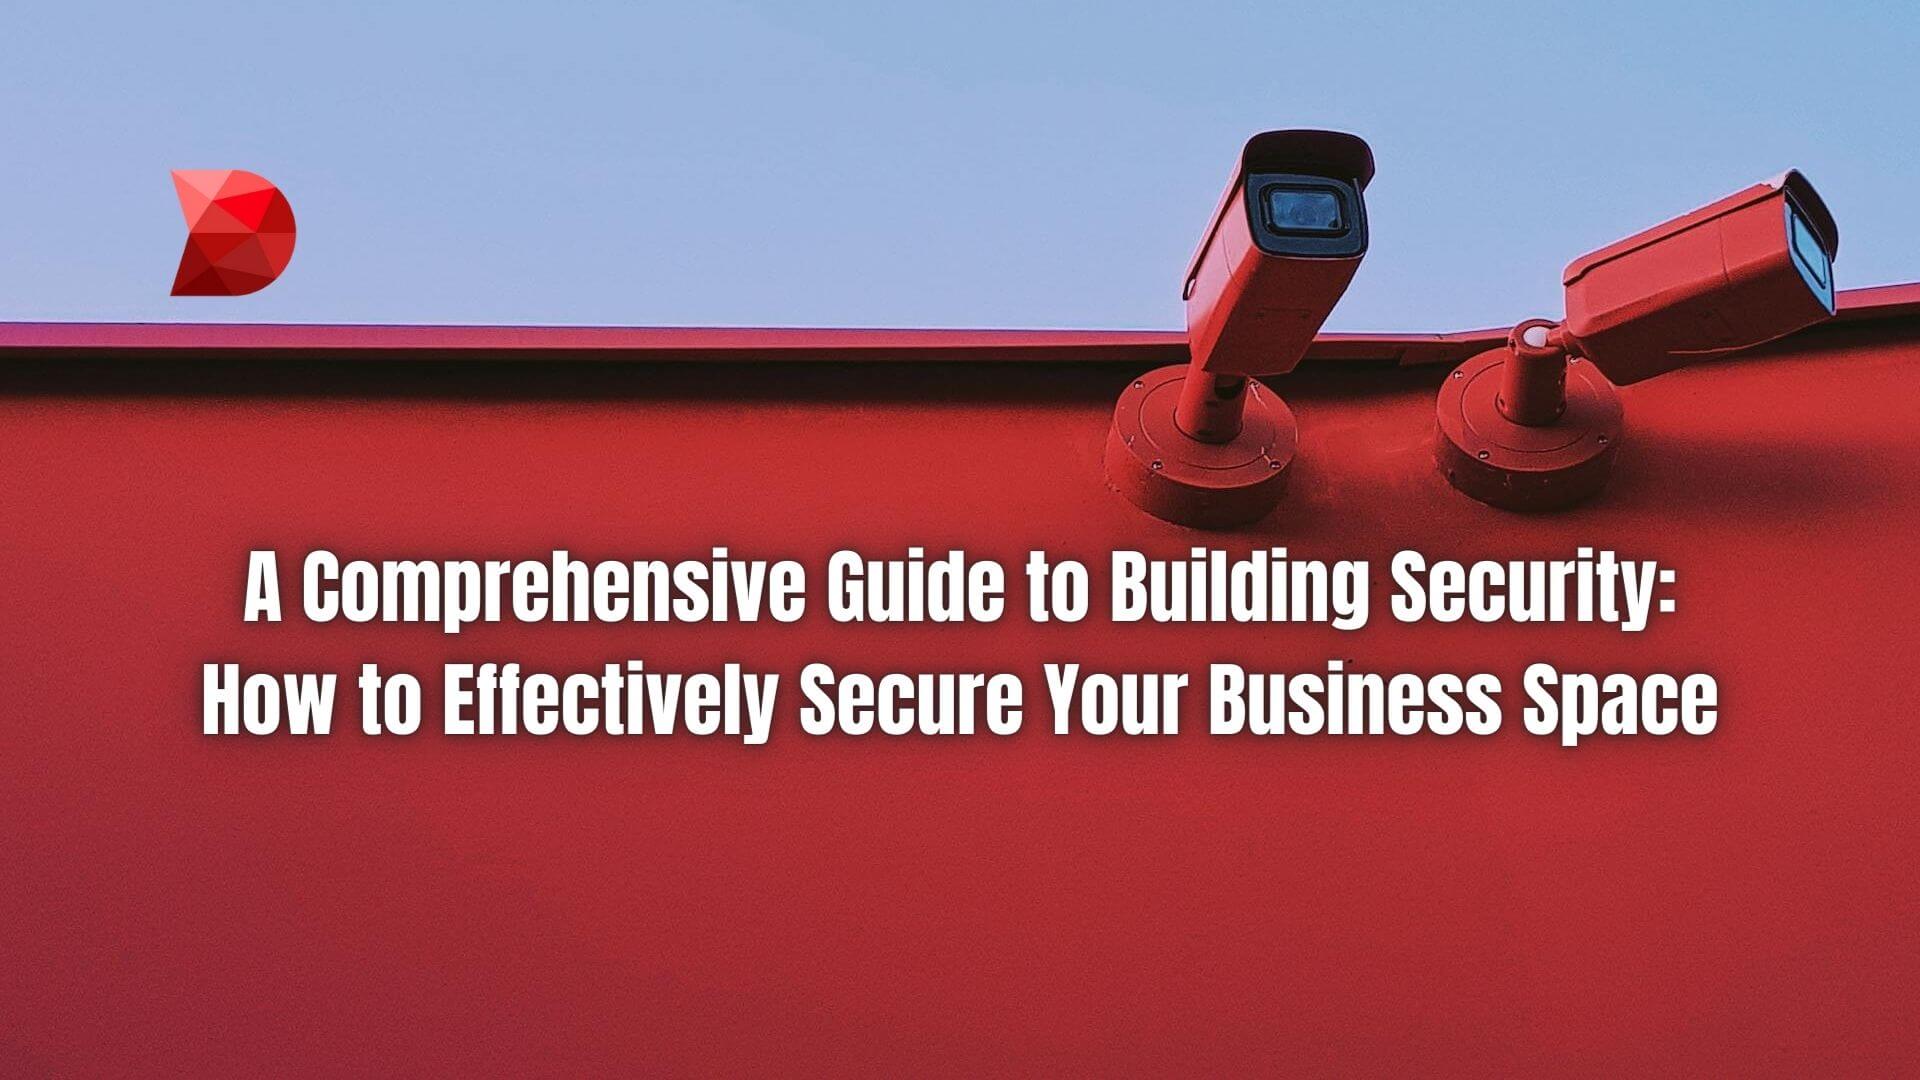 Enhance your building security with our guide. Explore practical tips and best practices to effectively secure your commercial premises.